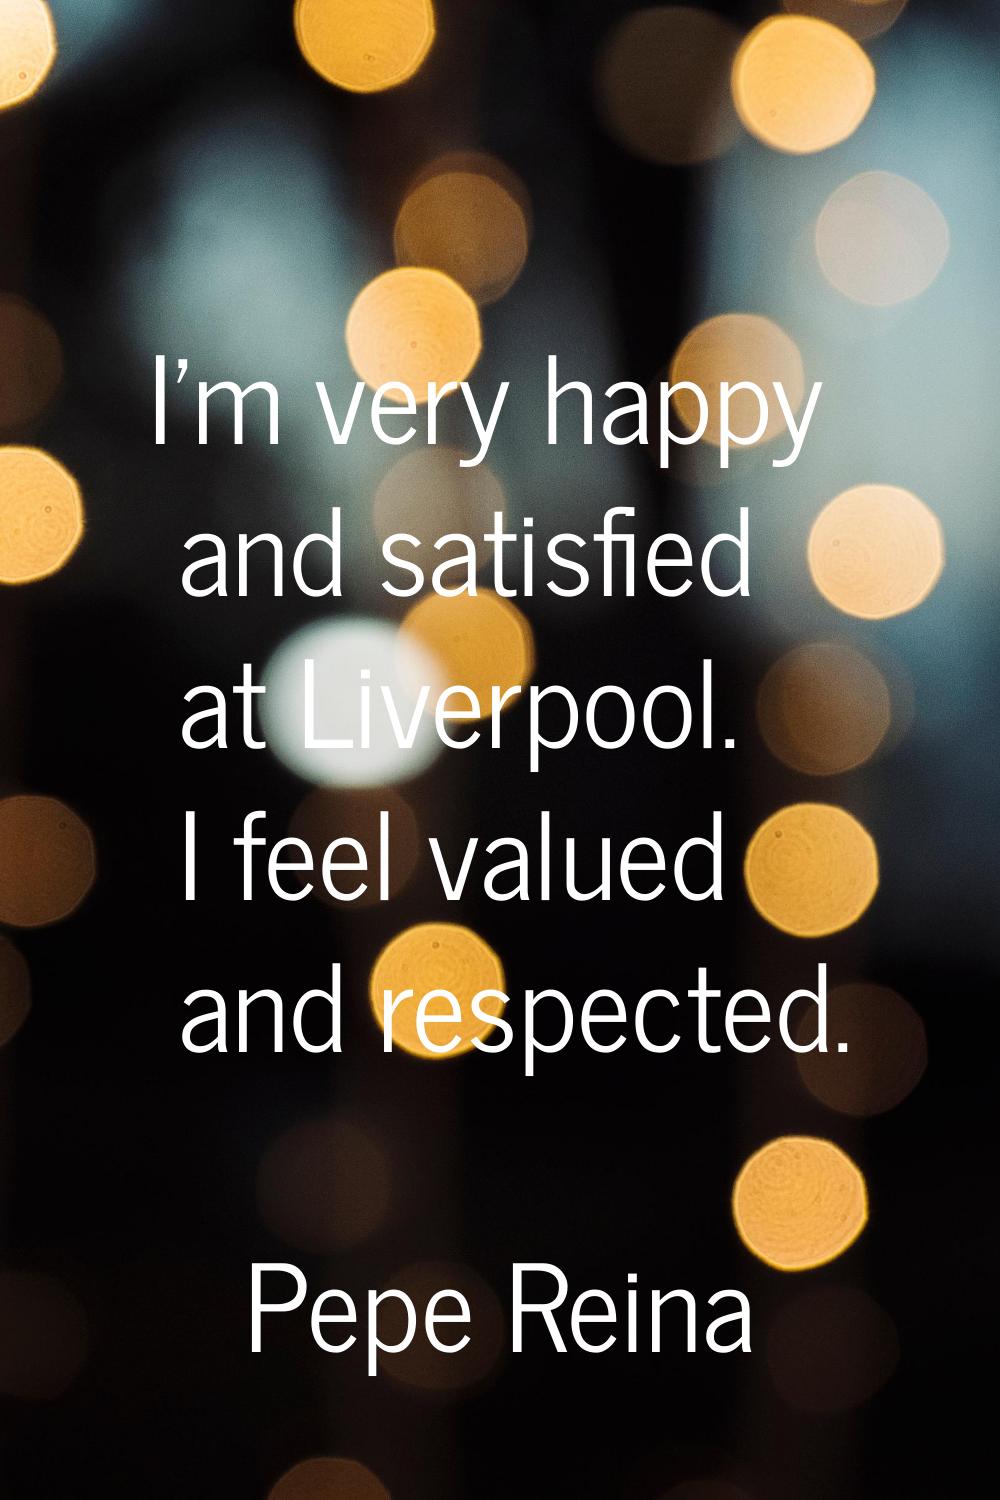 I'm very happy and satisfied at Liverpool. I feel valued and respected.